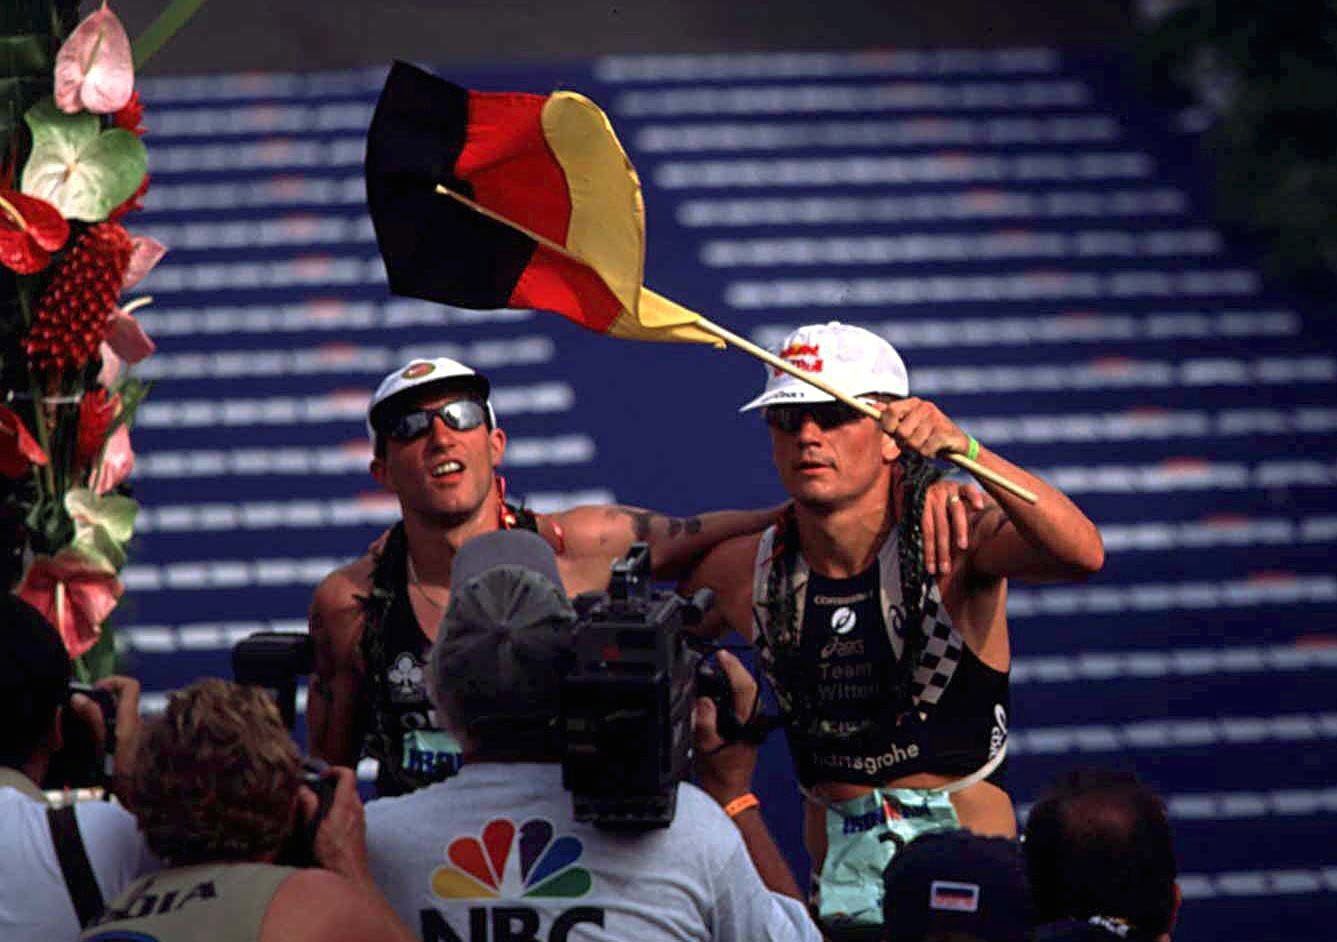 What happened to Luc Van Lierde, the first European to win the Hawaii Ironman?